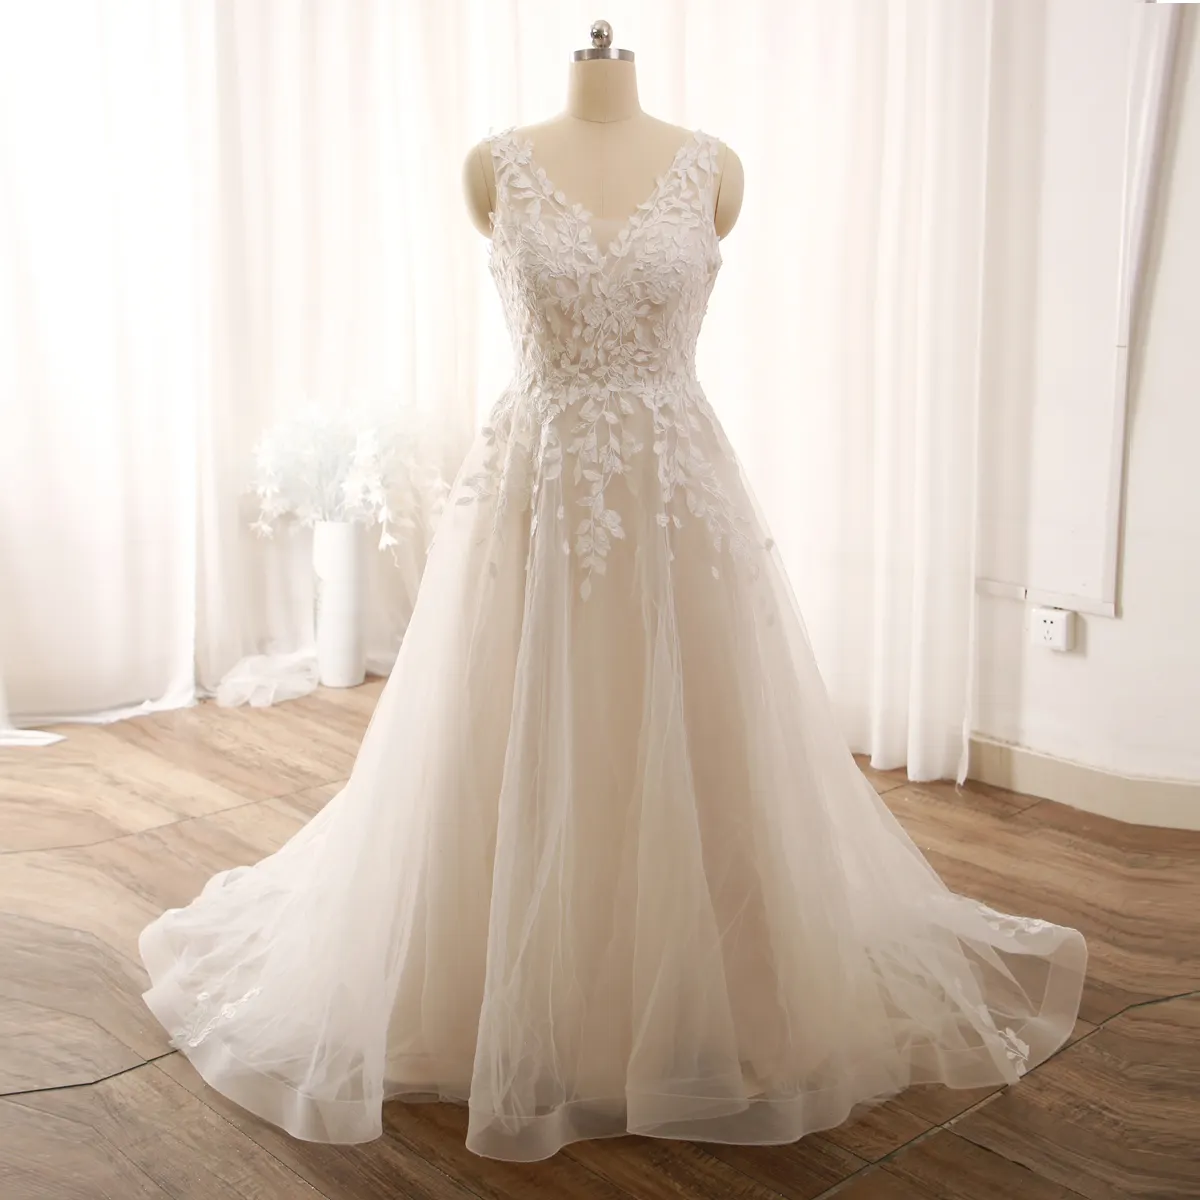 Ivory White A Line Tulle Ruffle Leaf Lace Bridal Gowns Custom Made Wedding Dresses for Women